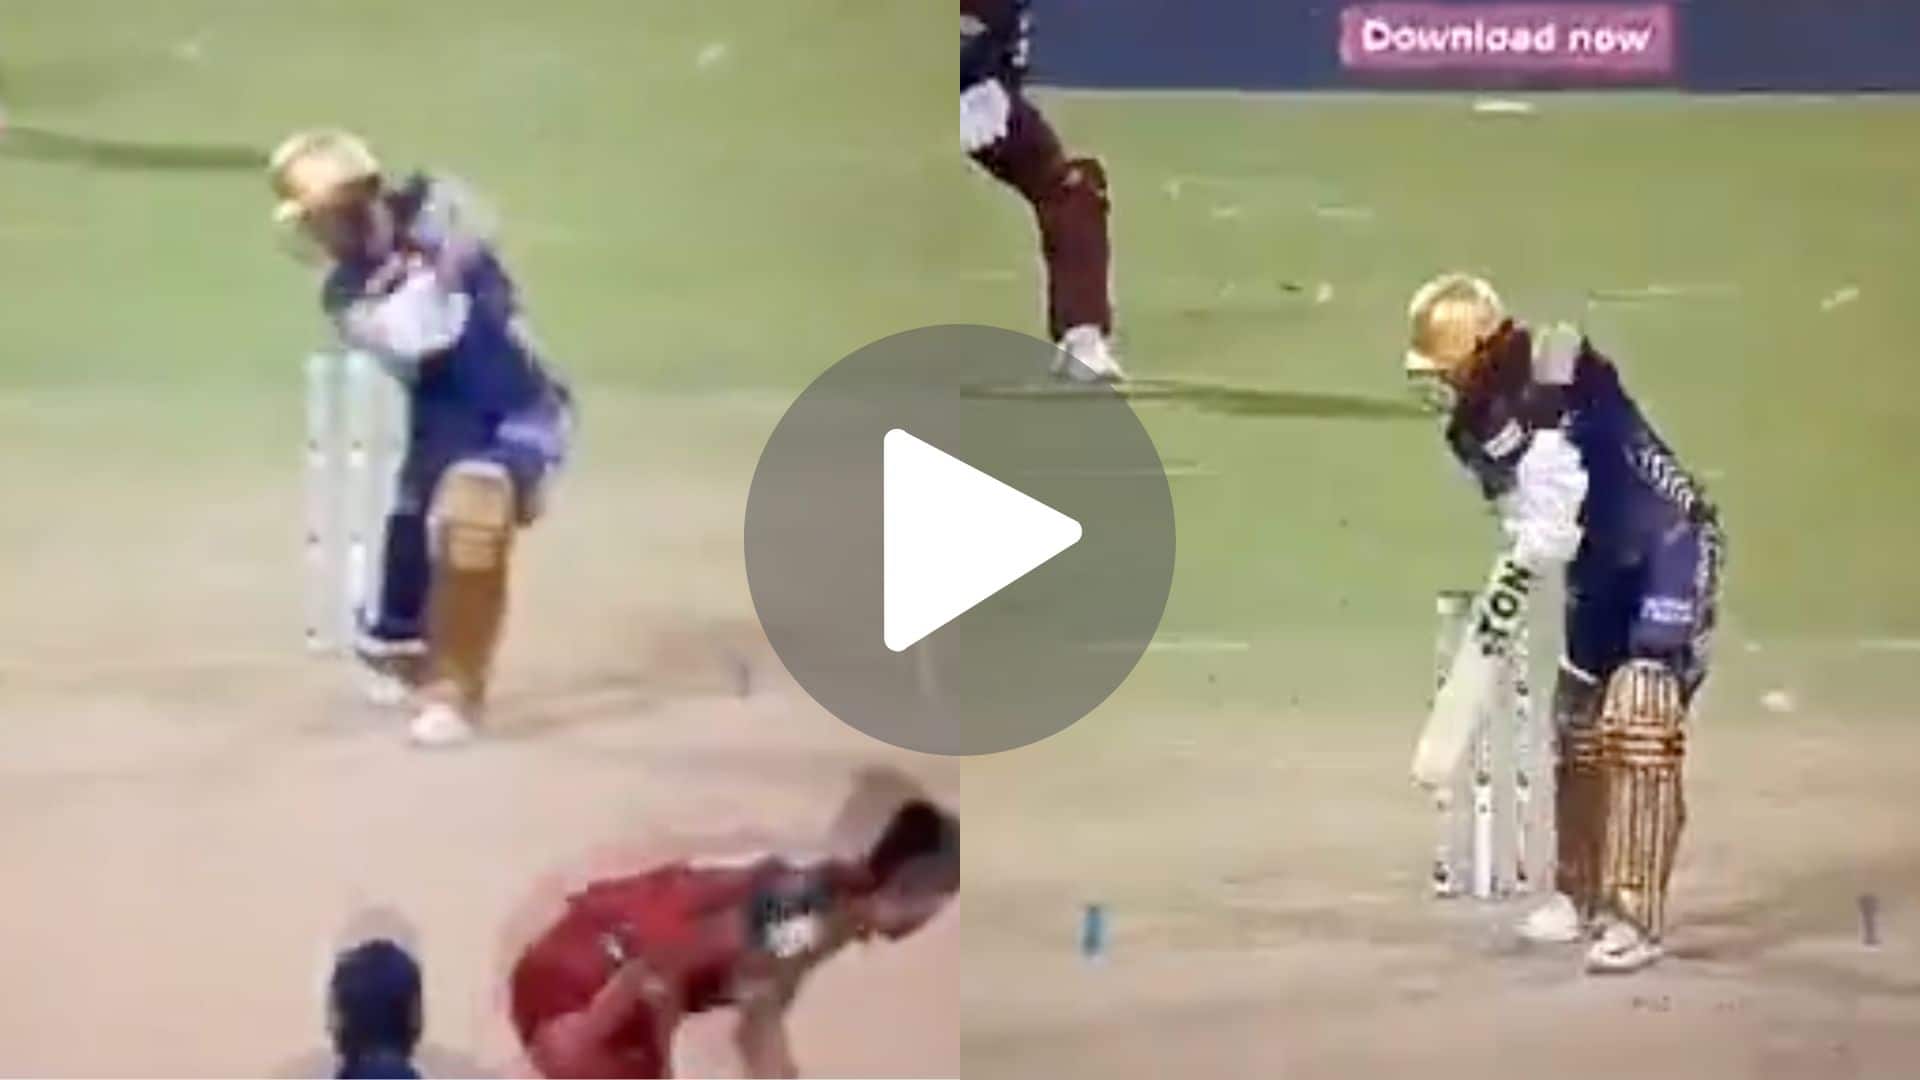 [Watch] 4, 4! Sensational Salt Brings Up His Fifty With Prolific Hitting vs Arshad Khan